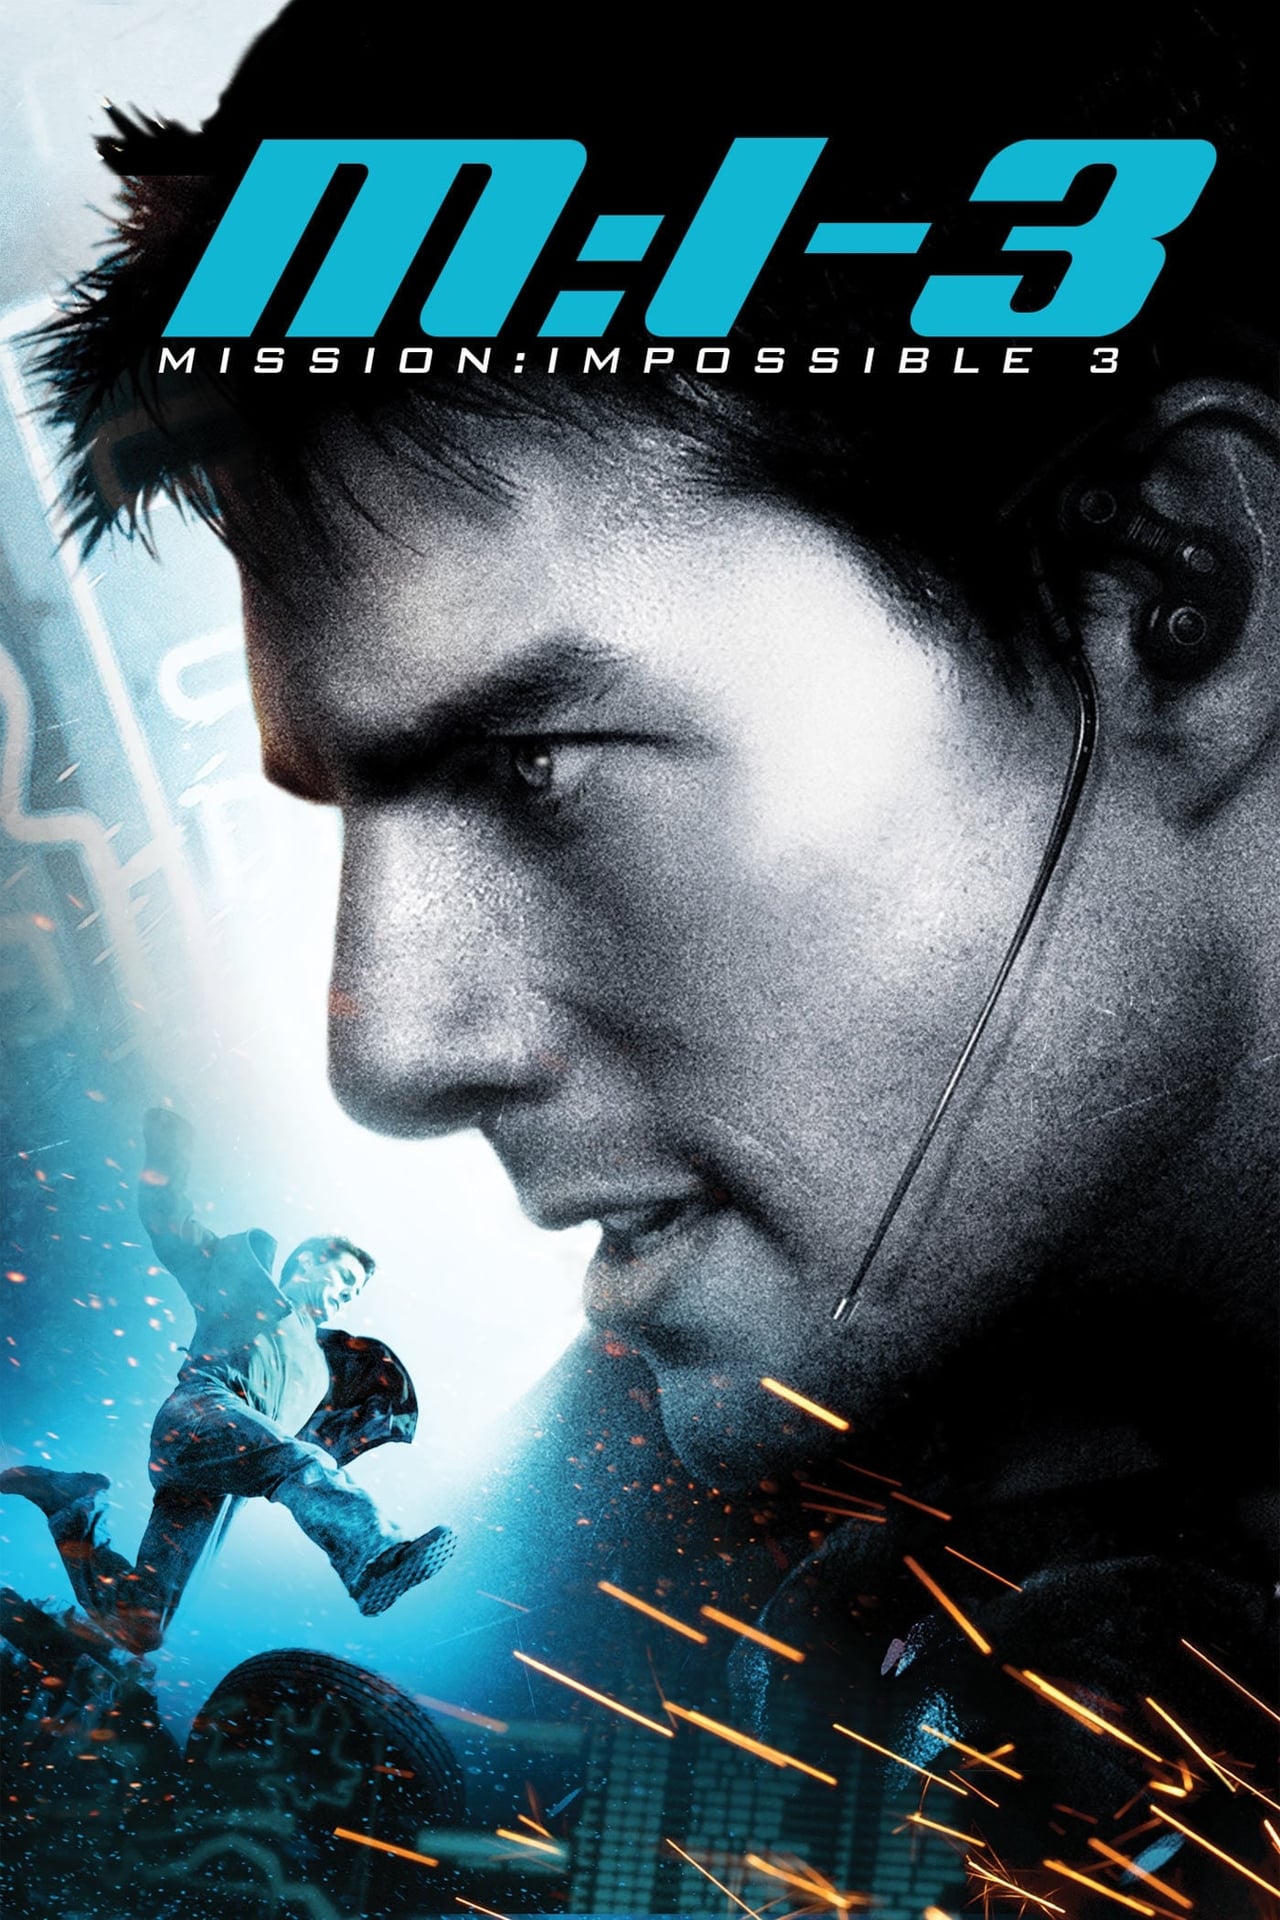 Mission: Impossible III (2006) 640Kbps 23.976Fps 48Khz 5.1Ch DD+ NF E-AC3 Turkish Audio TAC